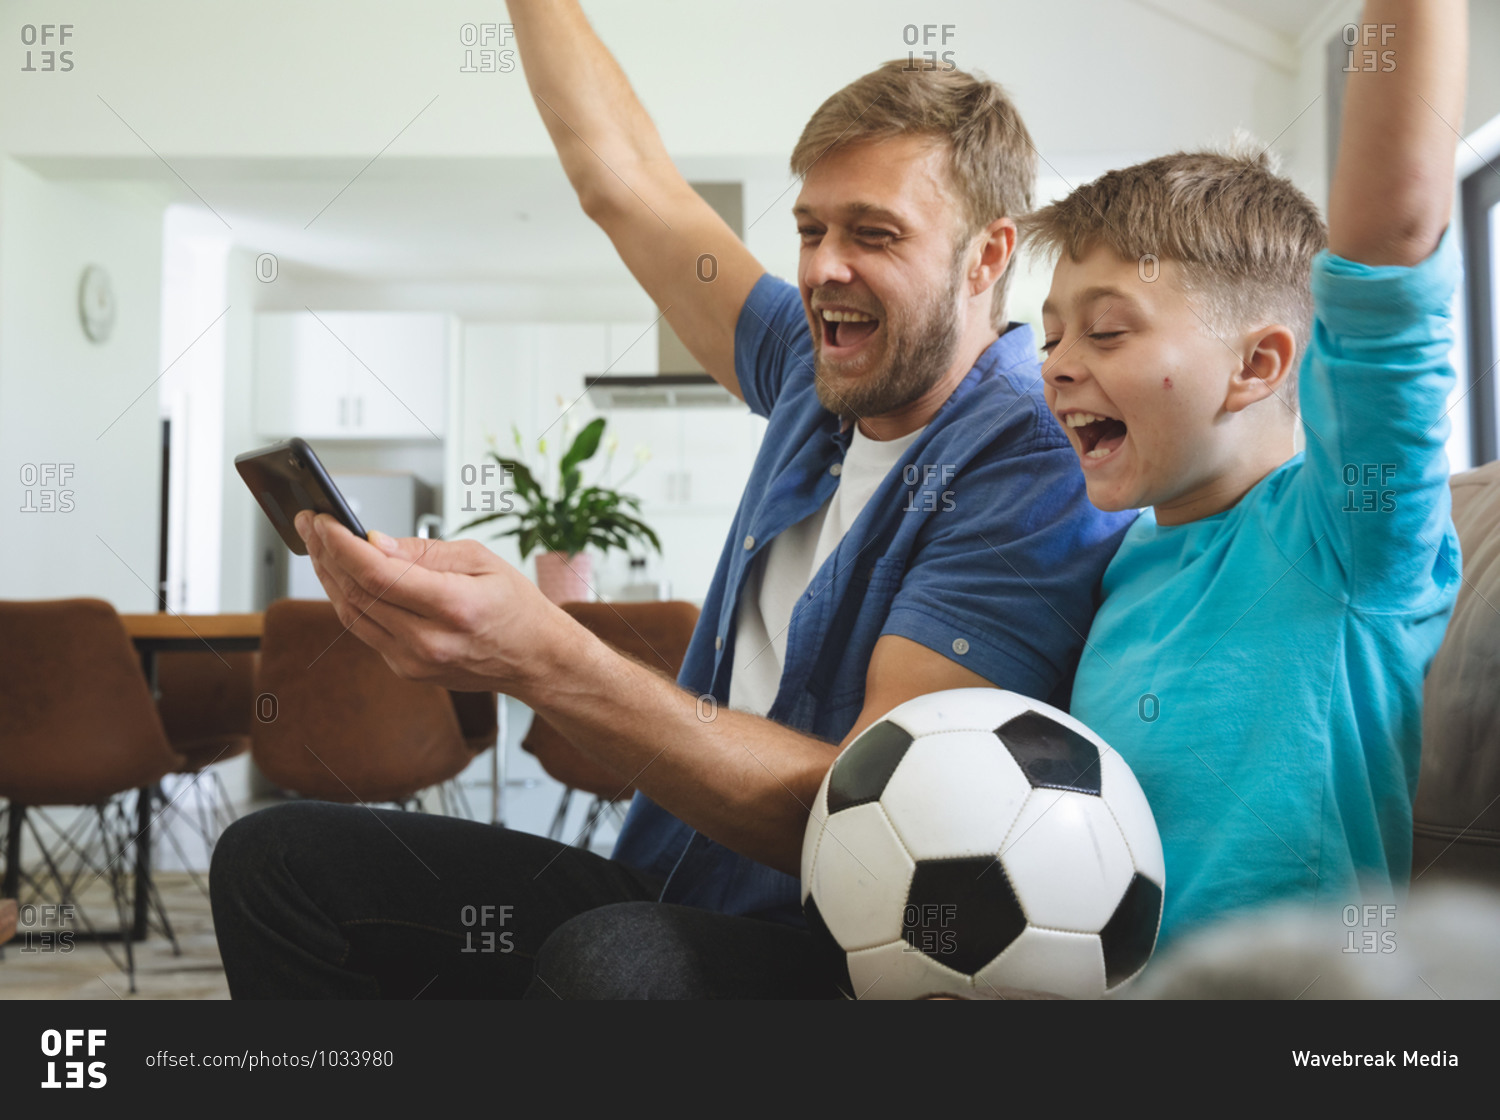 Caucasian man at home with his son together, sitting on sofa in living room, watching sports football game on smartphone, cheering. Social distancing during Covid 19 Coronavirus quarantine lockdown.